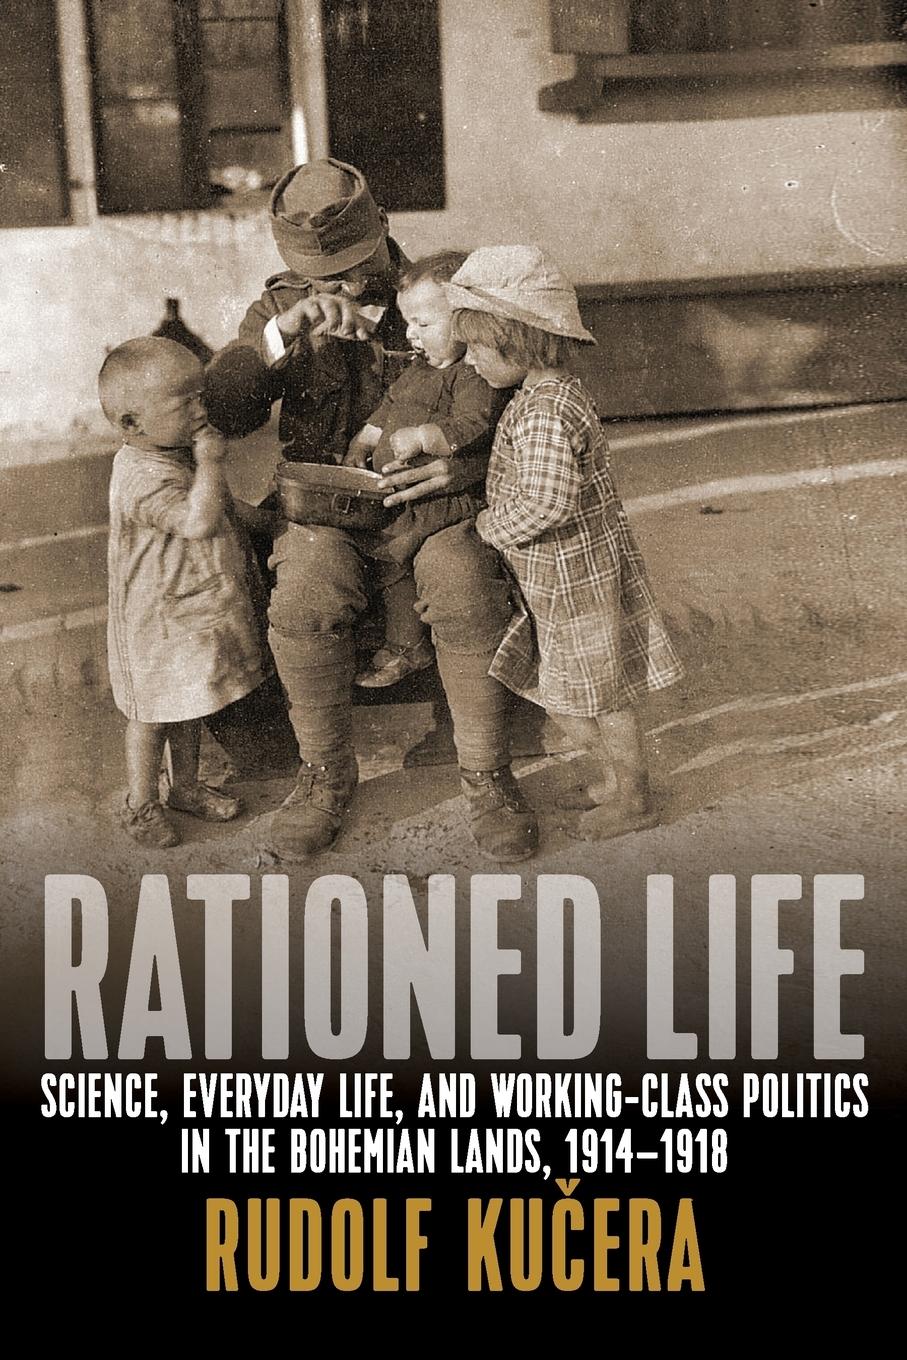 Rationed Life: Science, Everyday Life, and Working-Class Politics in the Bohemian Lands, 1914-1918 - Kucera, Rudolf